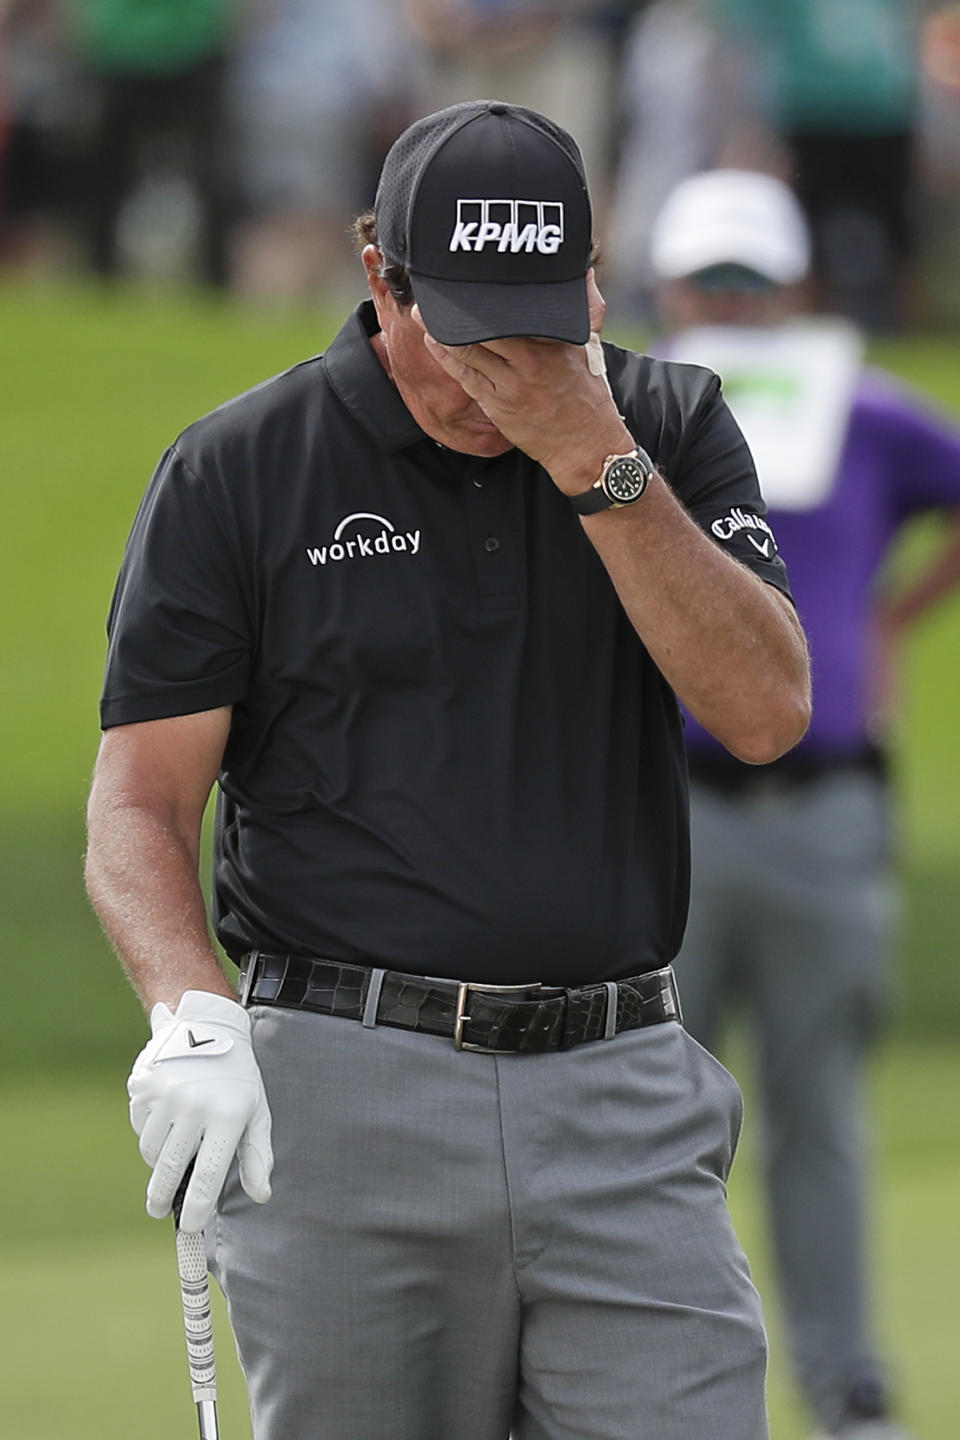 Phil Mickelson reacts to his shot on the first fairway during the second round of the Arnold Palmer Invitational golf tournament Friday, March 6, 2020, in Orlando, Fla. (AP Photo/John Raoux)